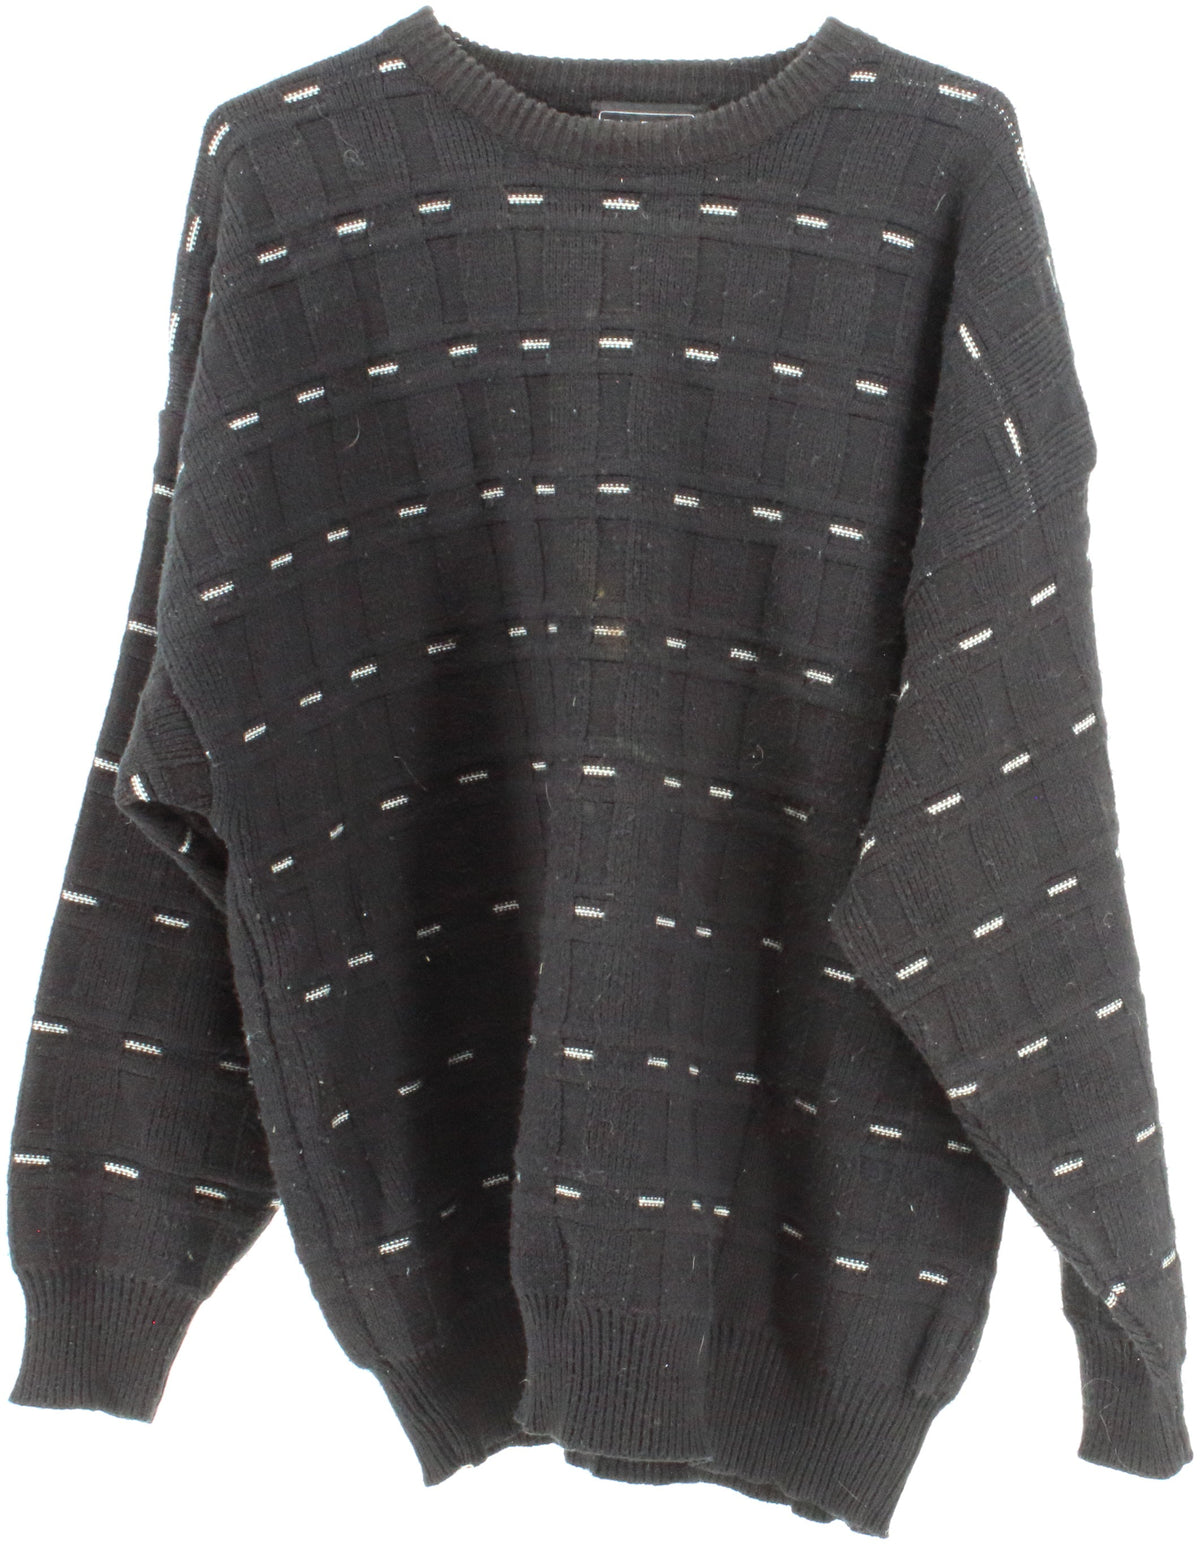 Peter England Black and White Sweater